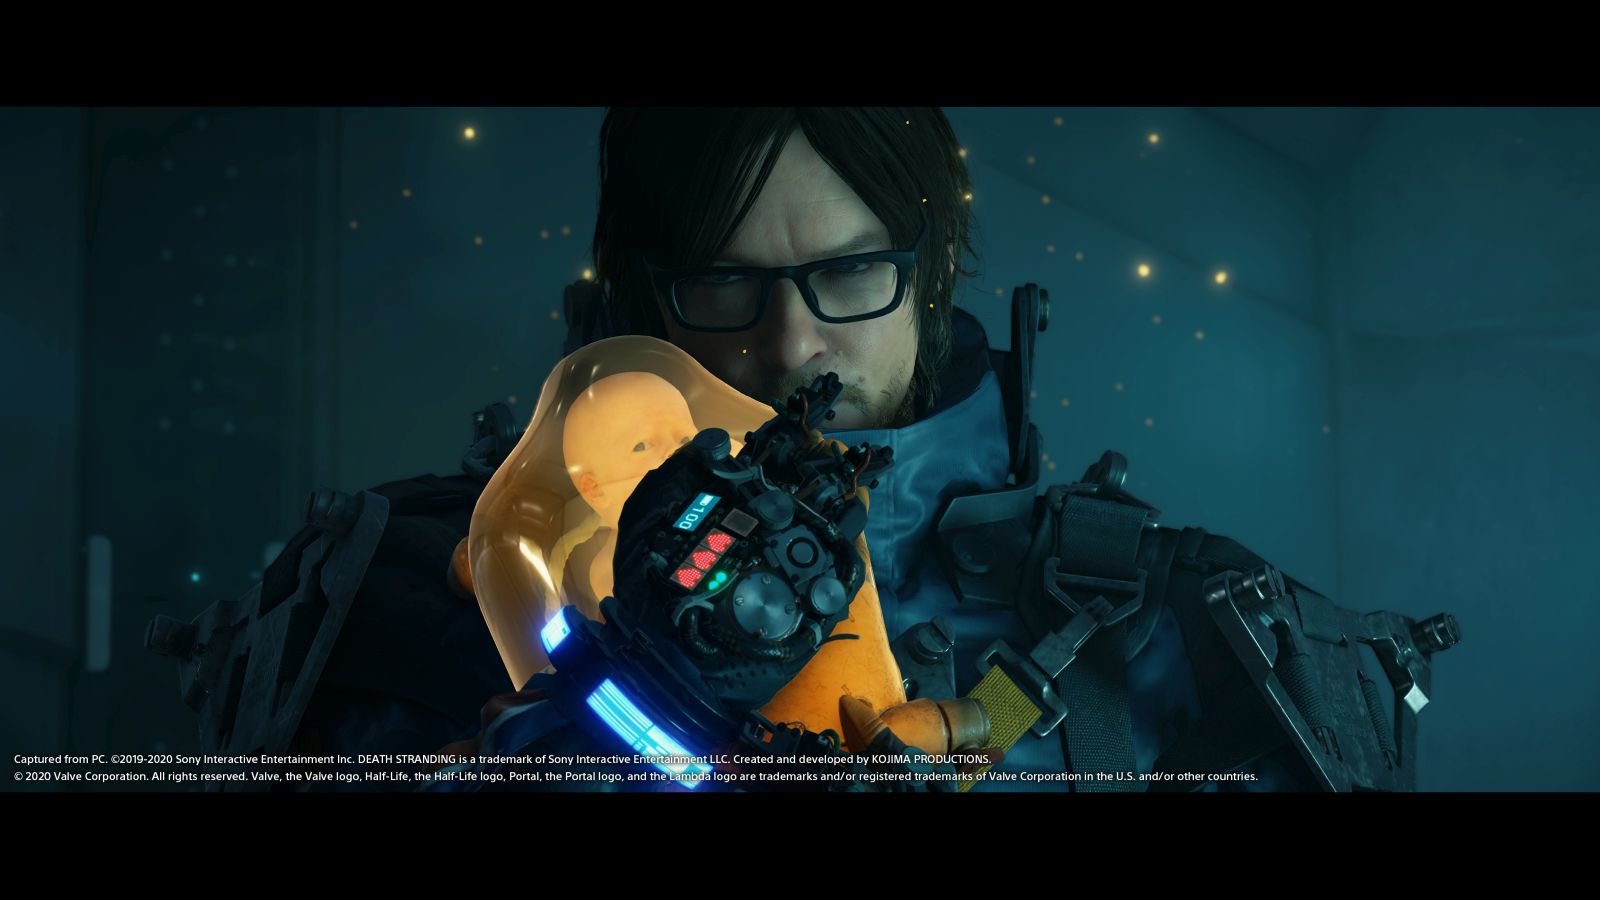 GeForce Now Blocked from Streaming Death Stranding to Xbox